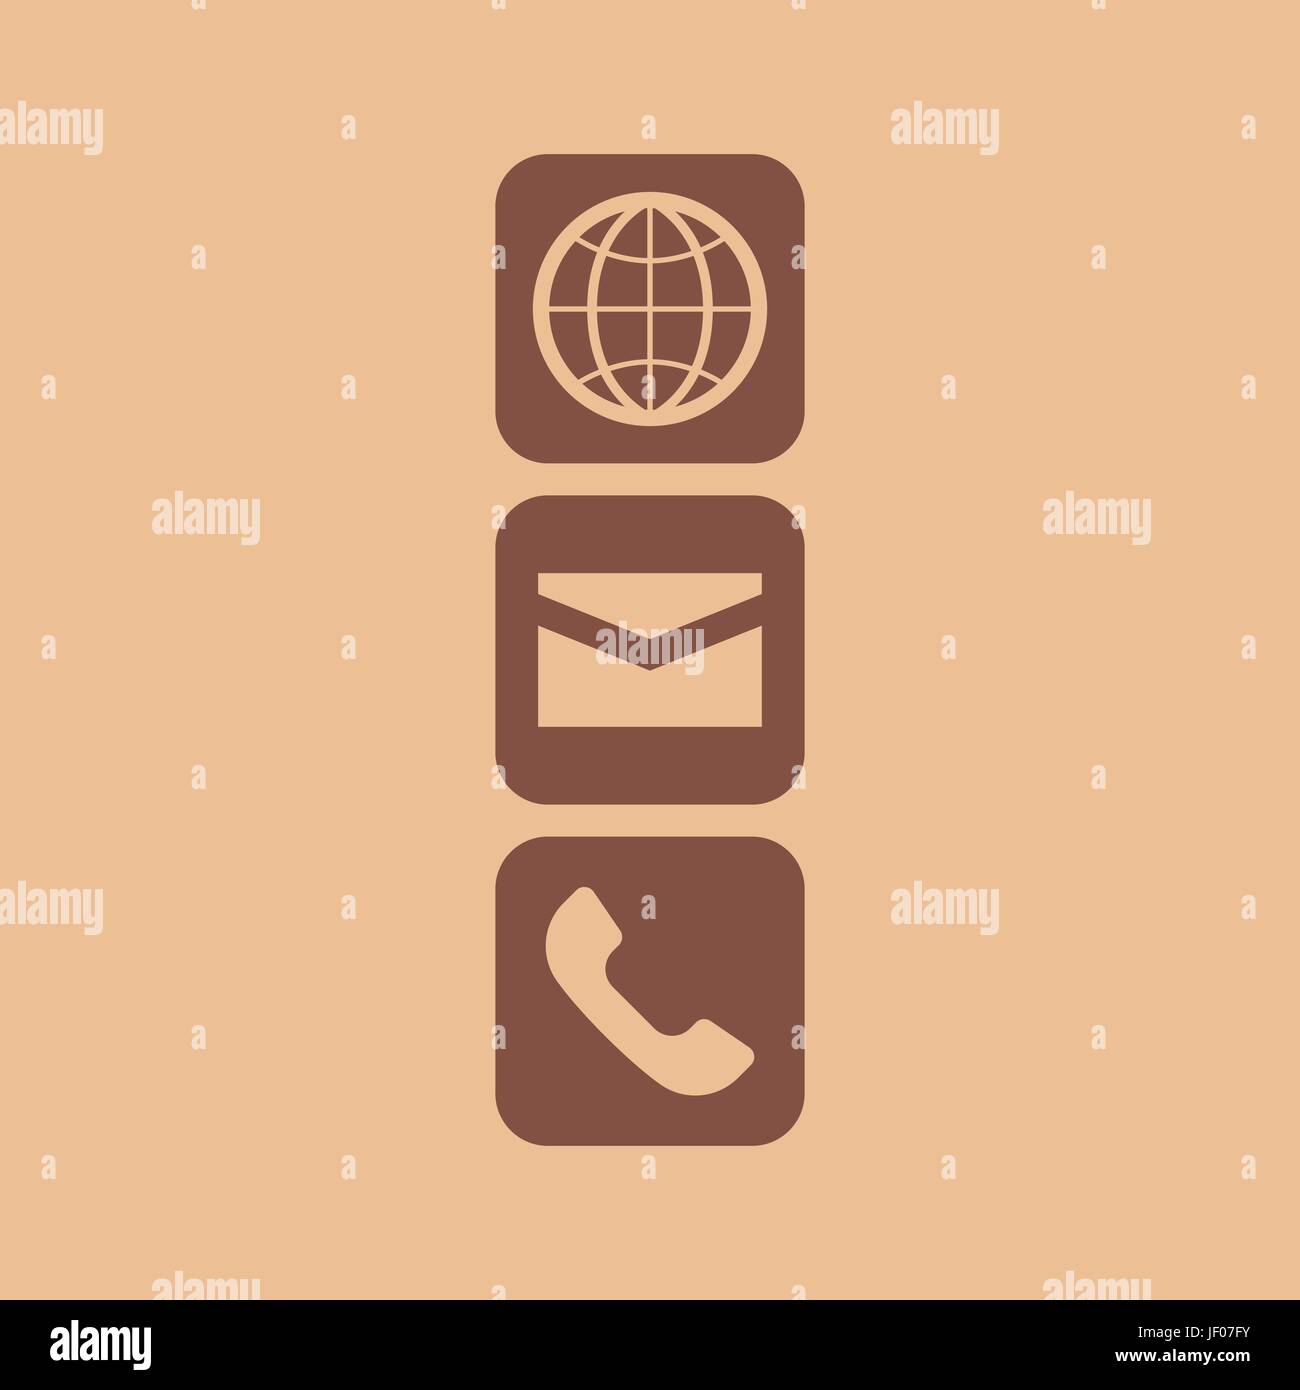 Globe Email and Phone icon. Contact icon set vector illustration Stock Vector